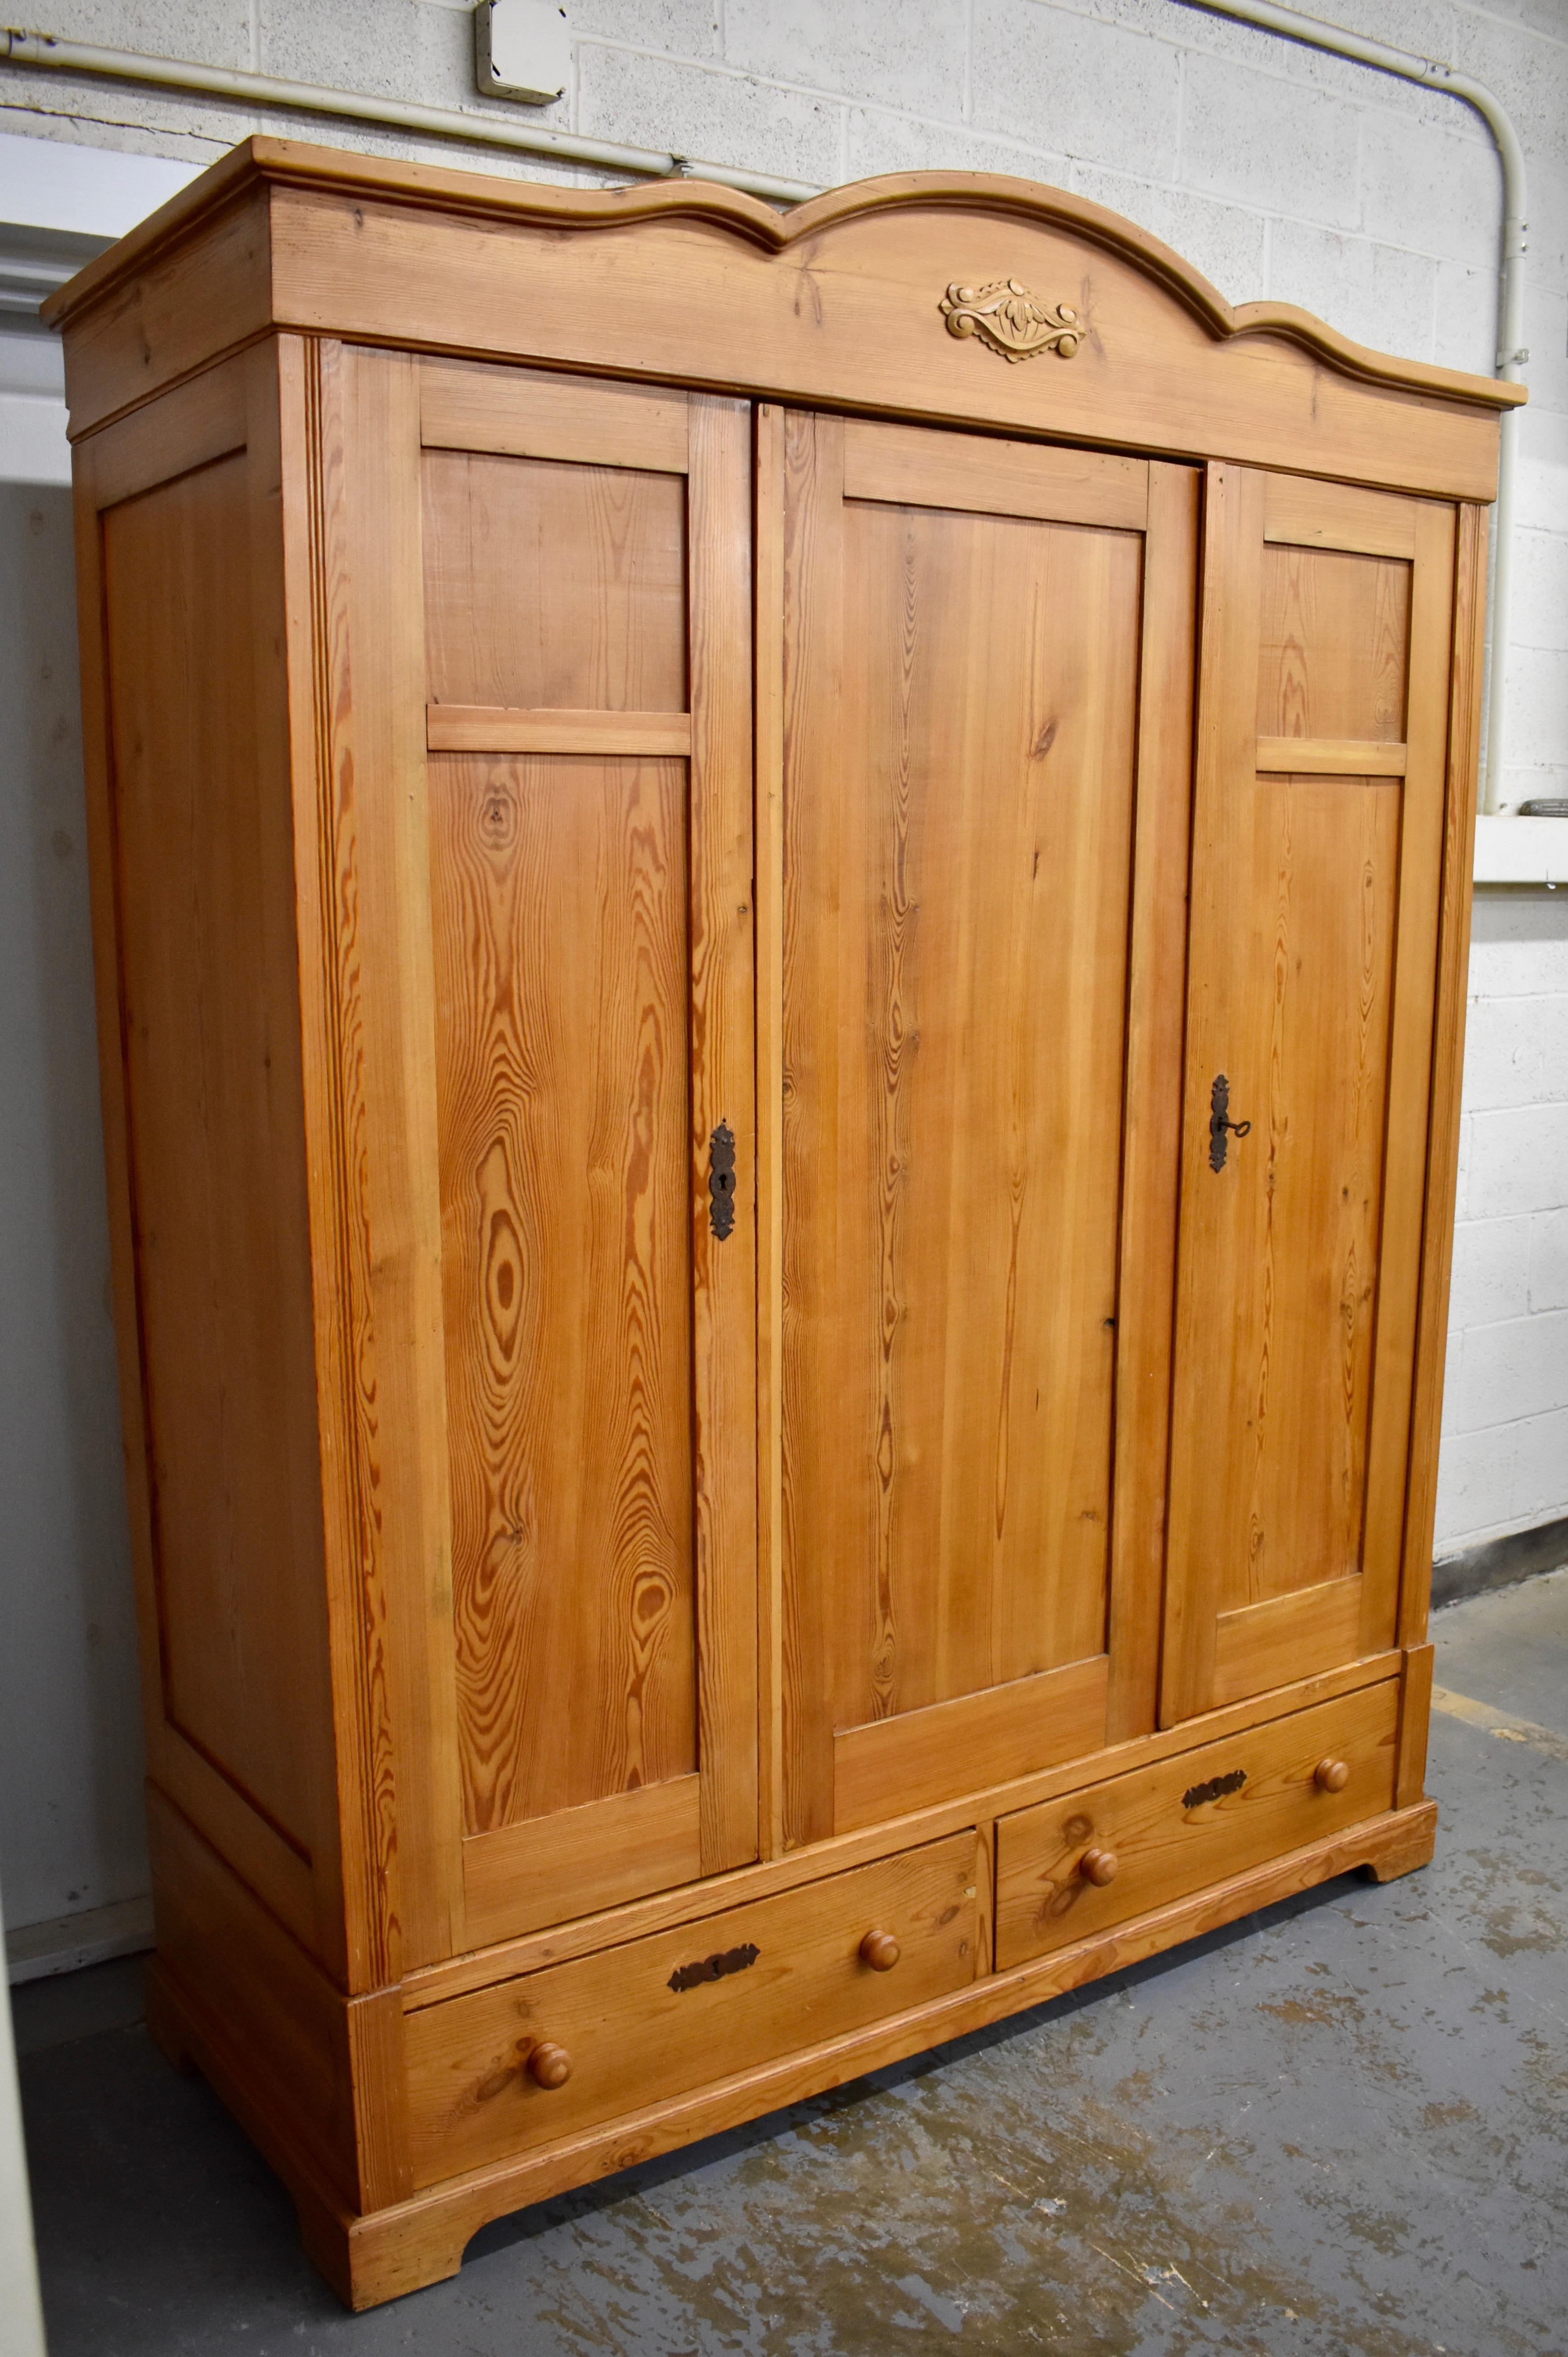 This large, three door armoire has minimal decoration beyond the crown, with its scalloped molding and applied medallion. The rest is plain and simple and very attractive, only an excised double reed runs the length of the outside face frame, to